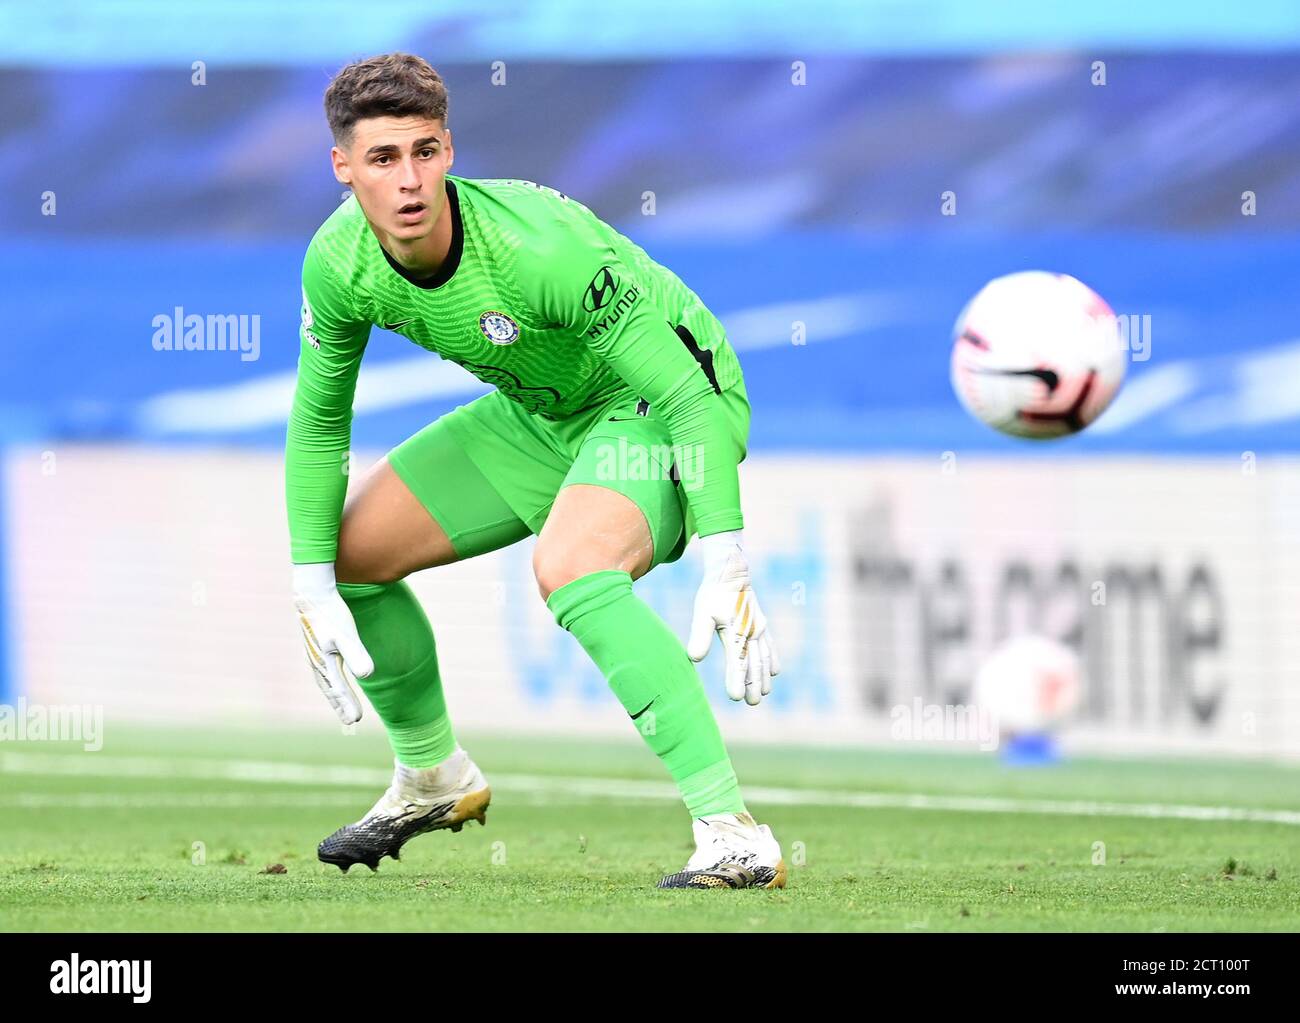 Chelsea goalkeeper Kepa Arrizabalaga watches as the ball goes wide during the Premier League match at Stamford Bridge, London. Stock Photo